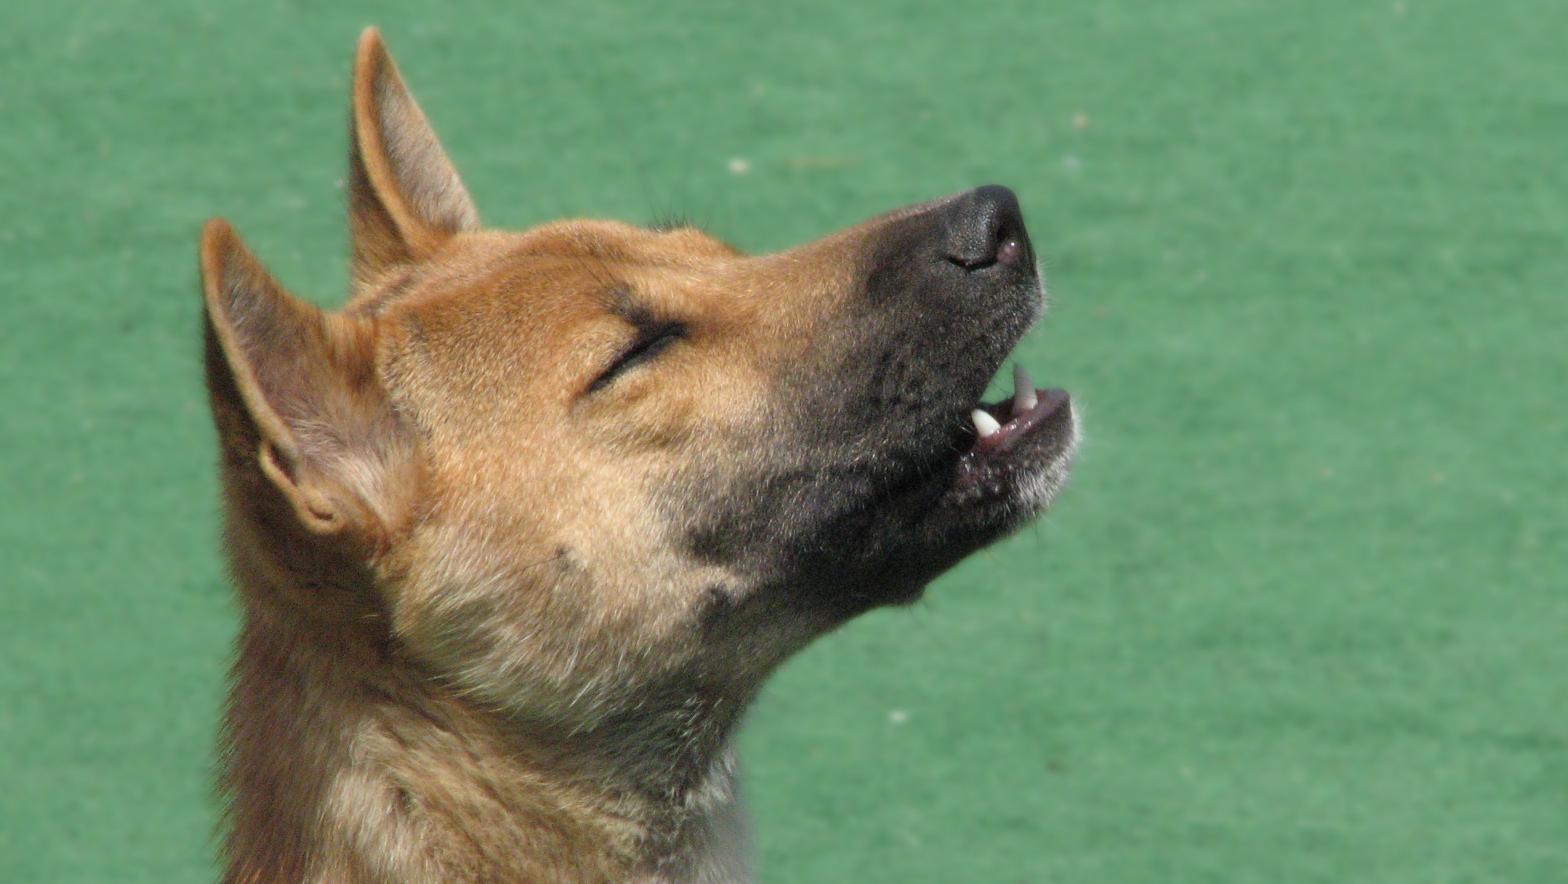 A captive New Guinea singing dog, mid-song. (Image: @R.G. Daniel/CC by 2.0)